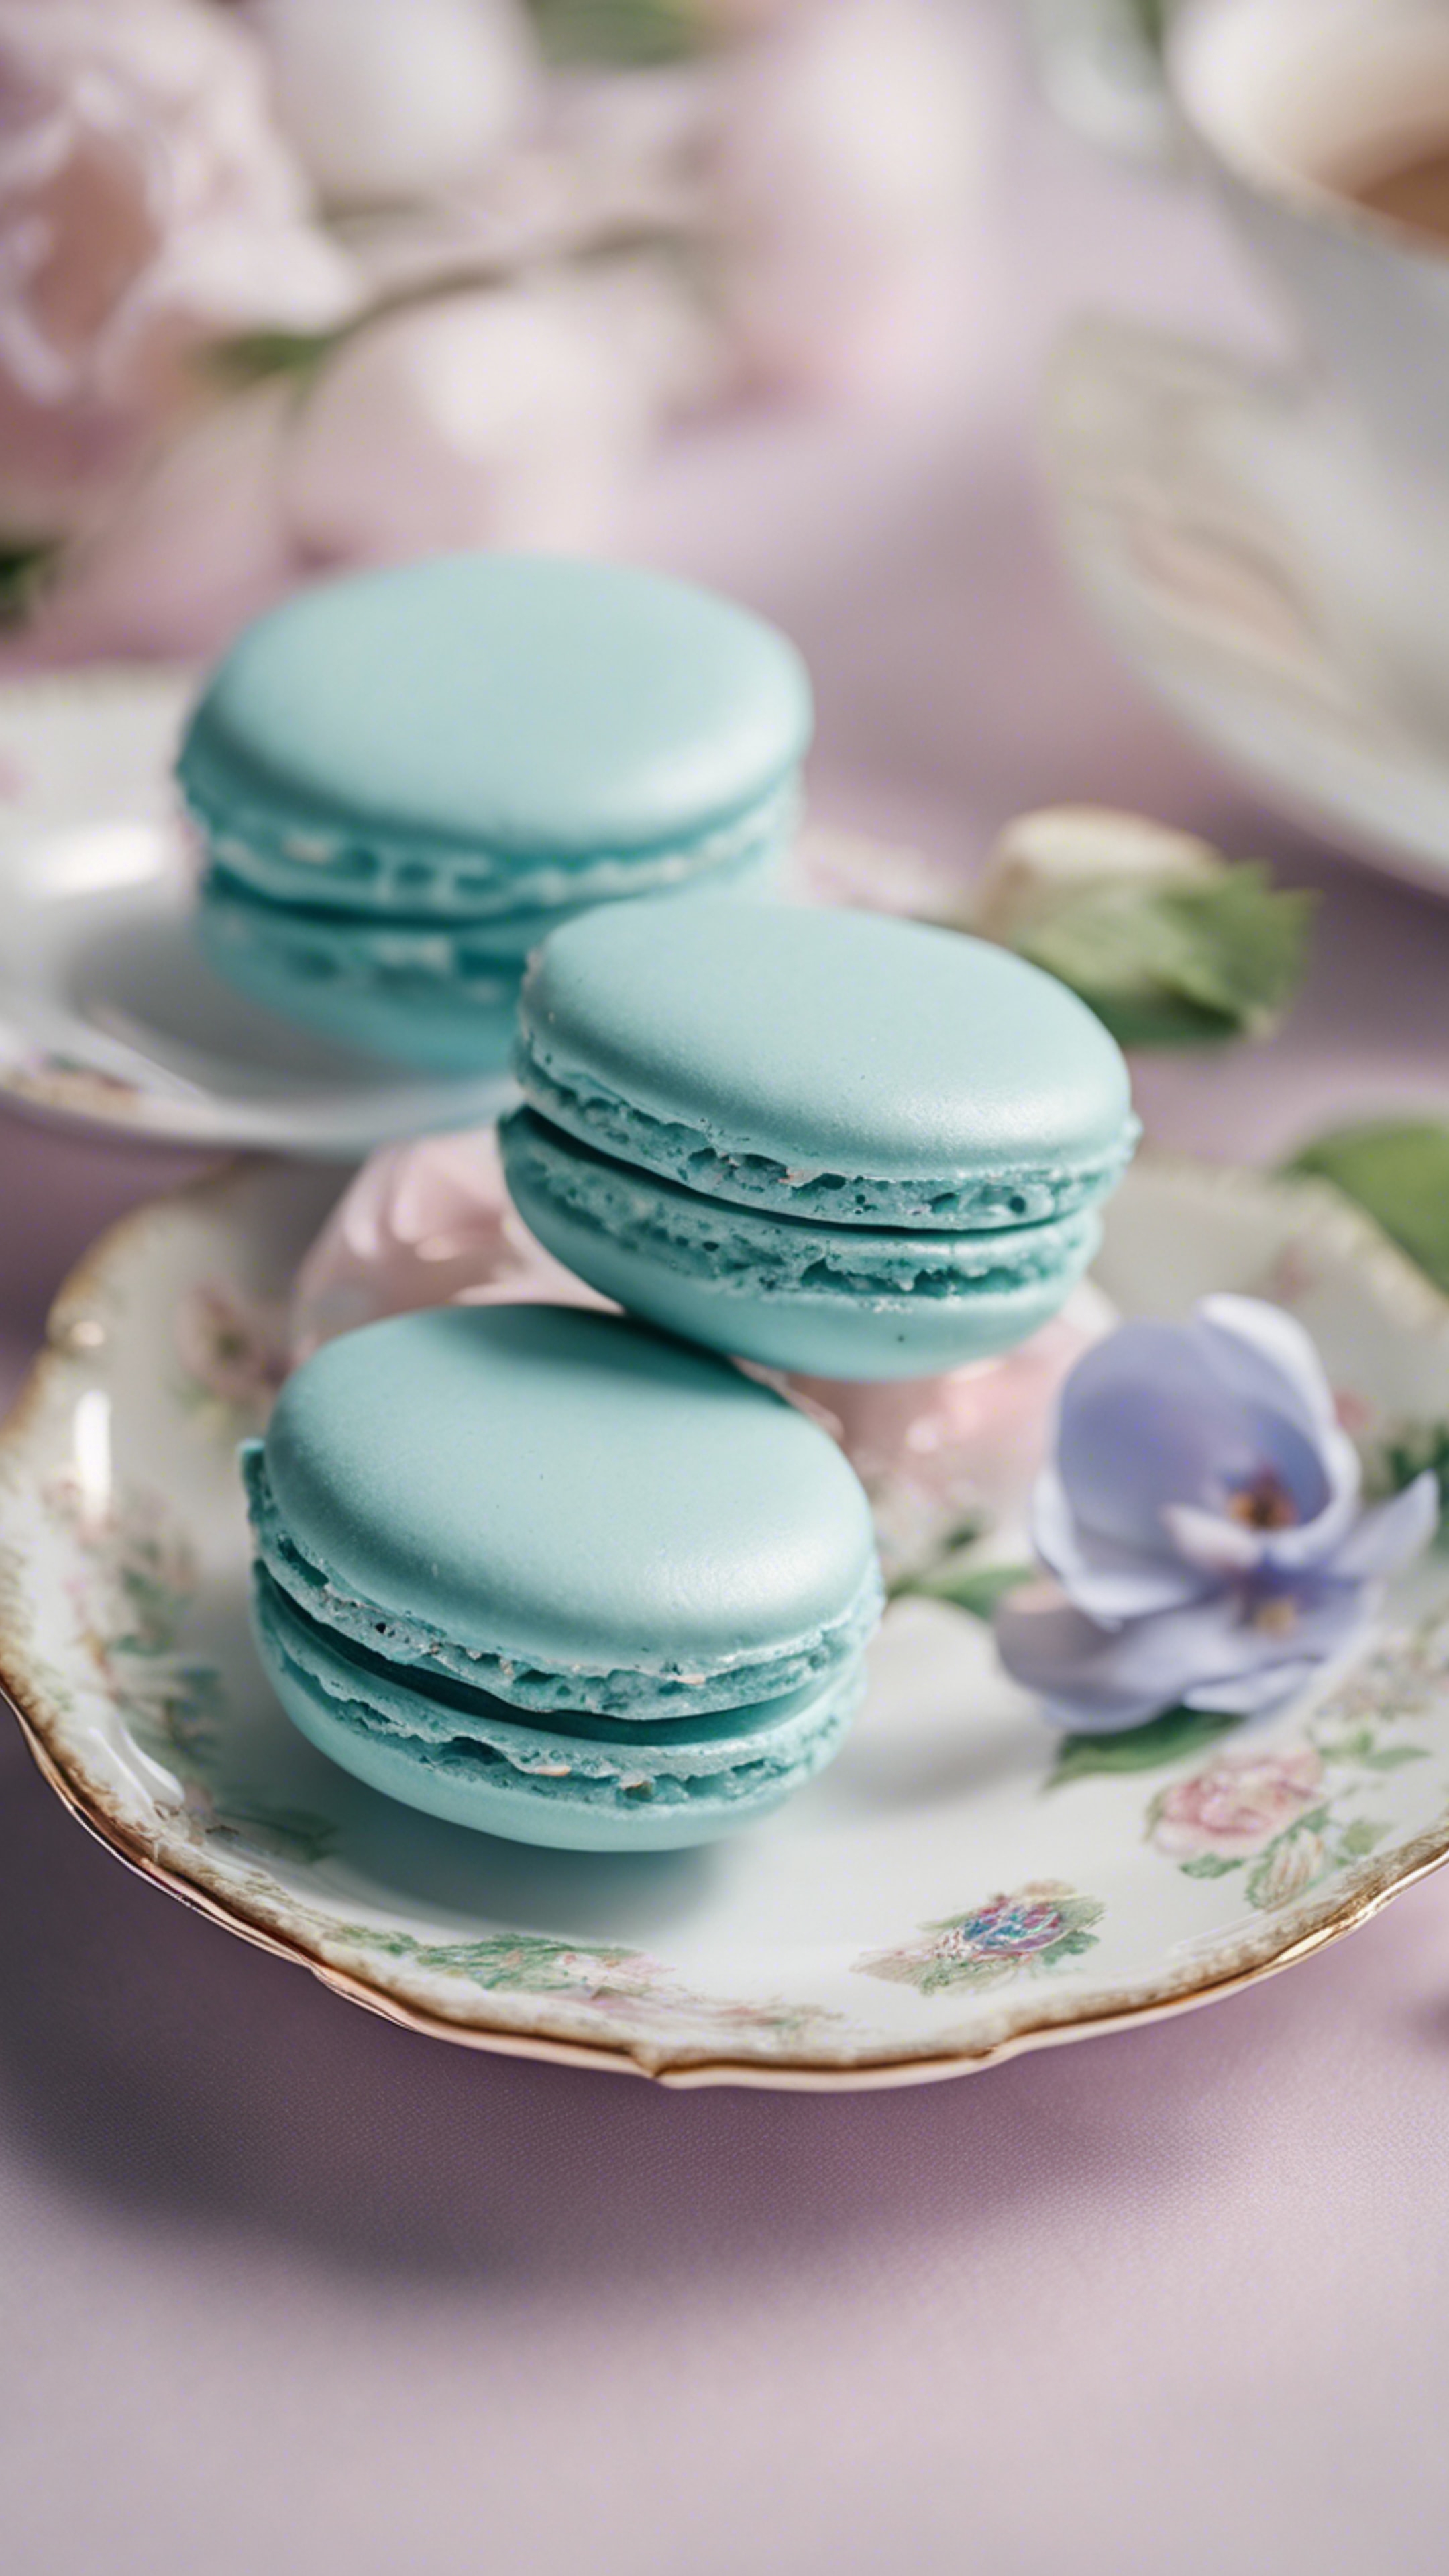 A pair of pastel blue French macarons on a dainty floral china plate. Tapet[cc240826fa4e4ee284e3]